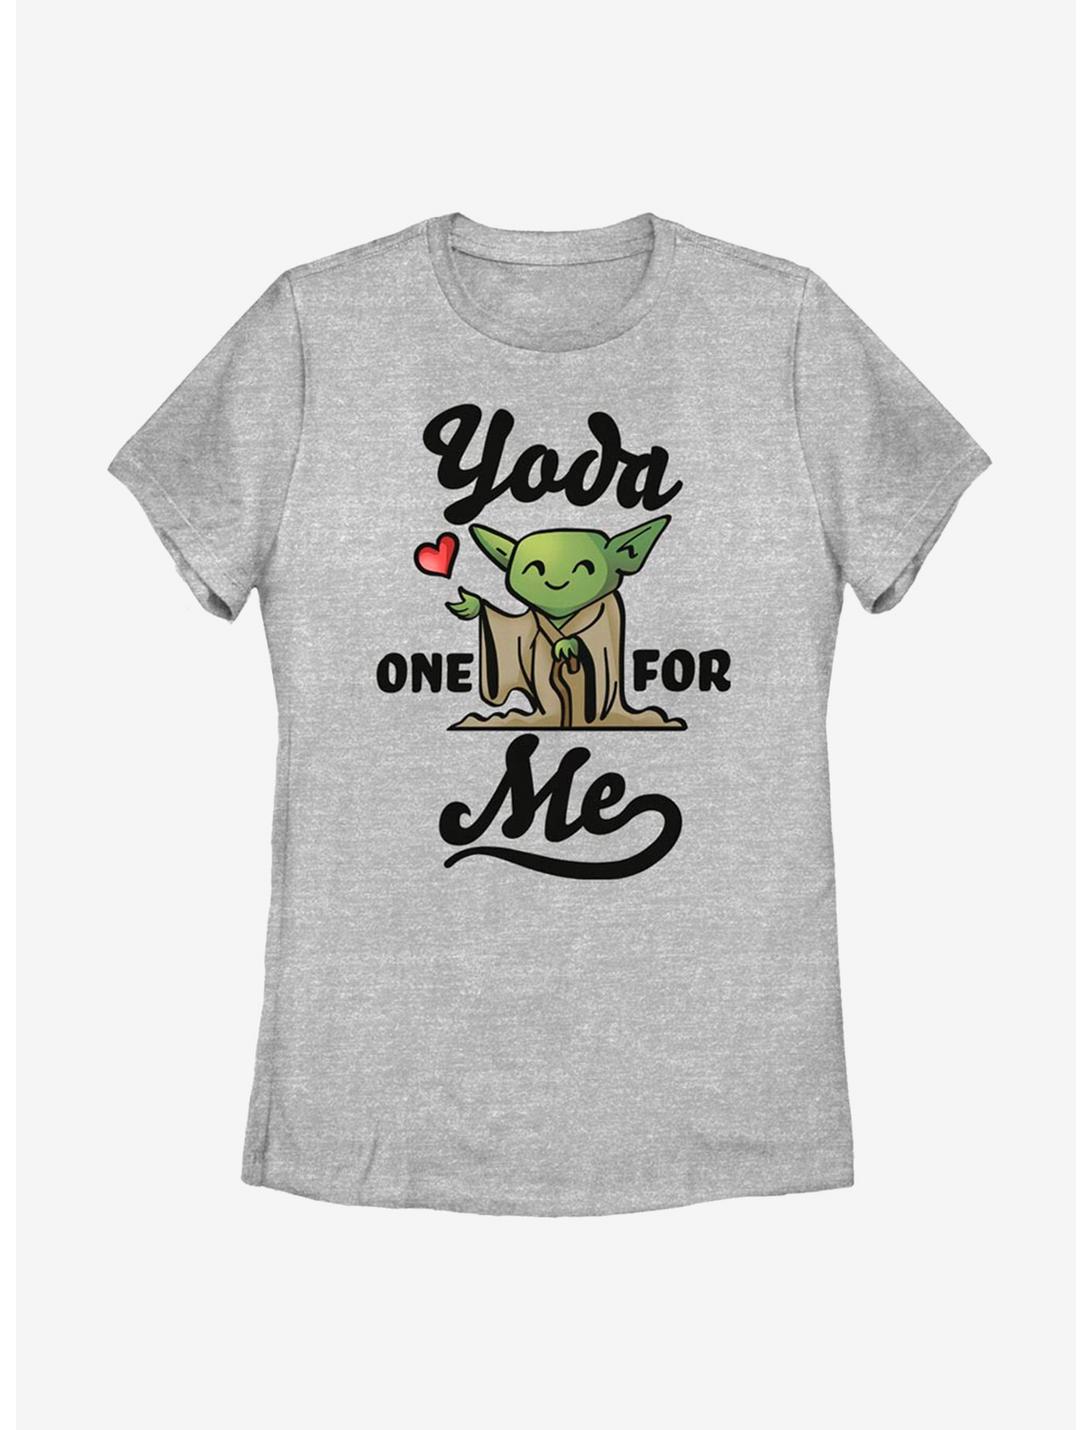 Star Wars One For Me Yoda Heart Womens T-Shirt, ATH HTR, hi-res